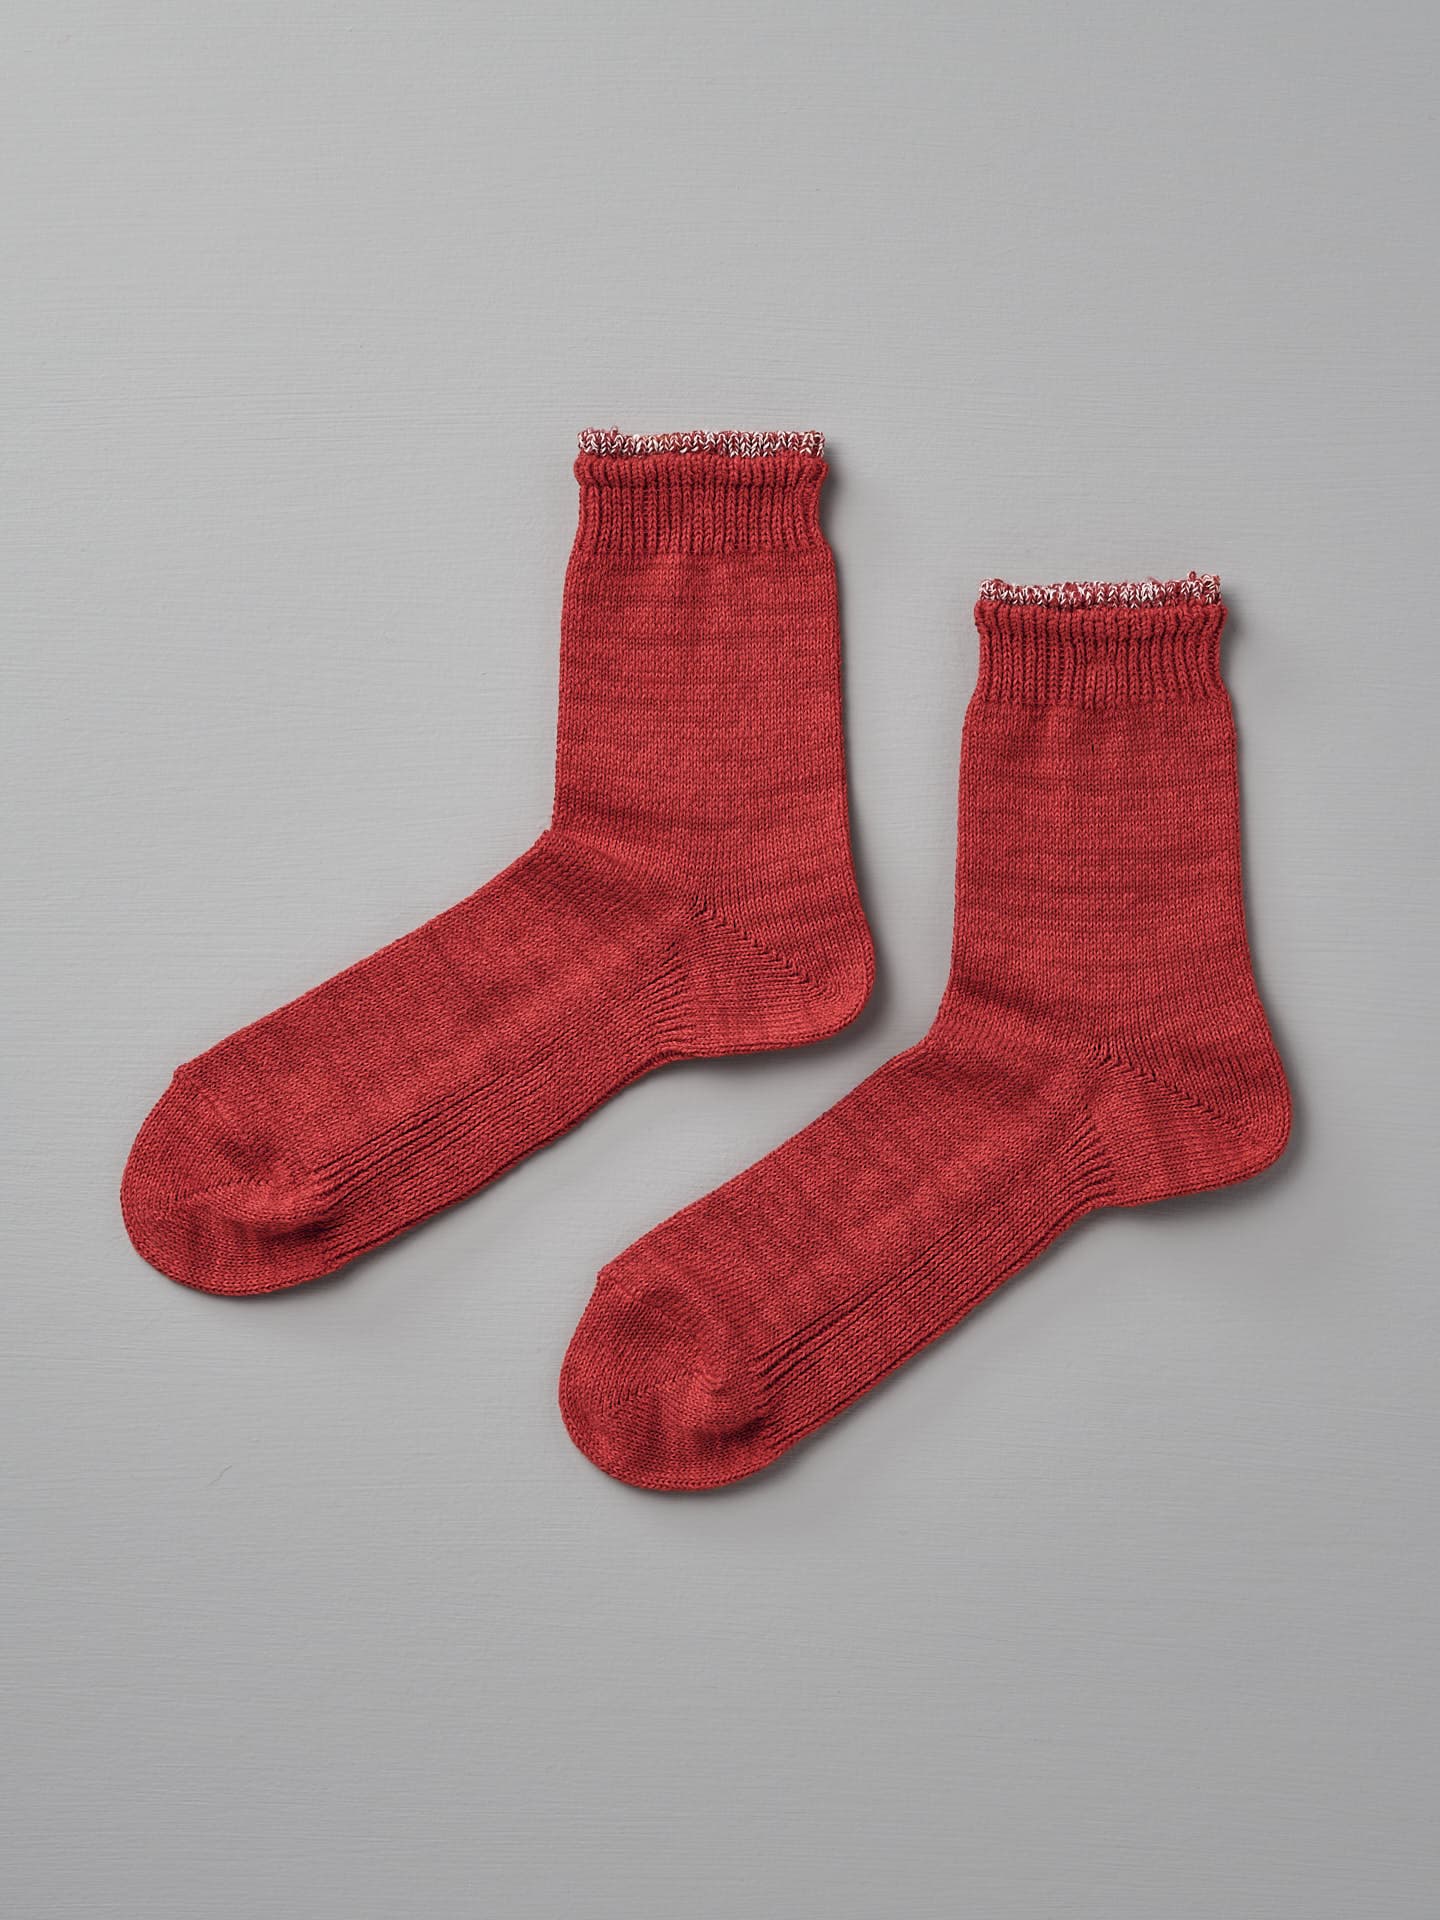 A pair of Mauna Kea Organic Top Switching Socks – Red, available in sizes EUR 35—38, is laid out on a gray surface.